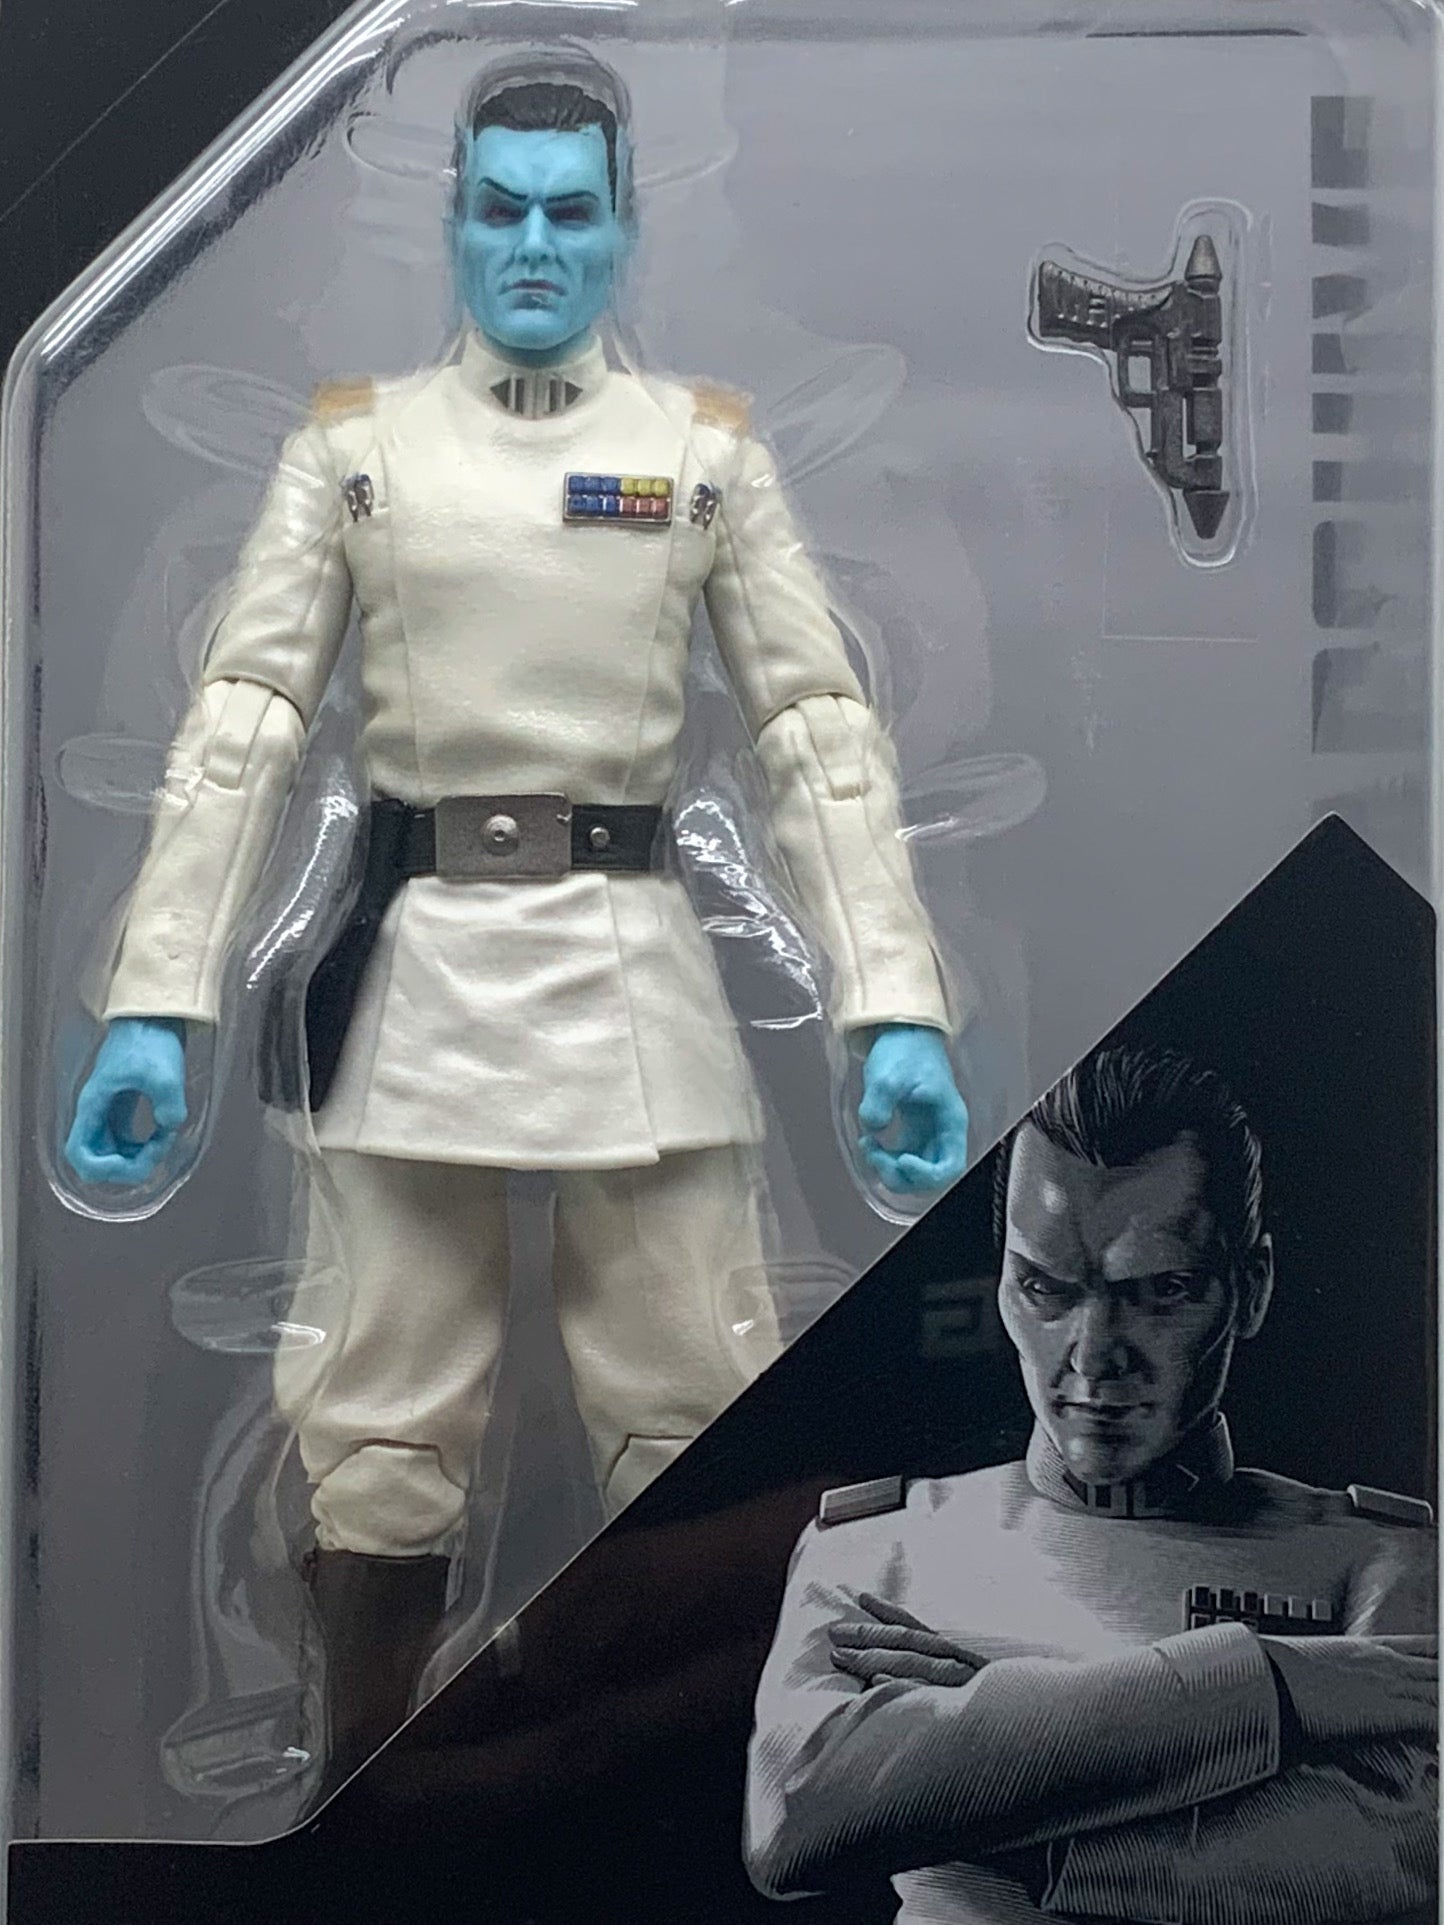 Buy at TatoyShop.com Thrawn was a male Chiss, known for his brilliant strategic mind and ruthlessness, he was determined to “pull the Rebels apart piece by piece” for the Empire